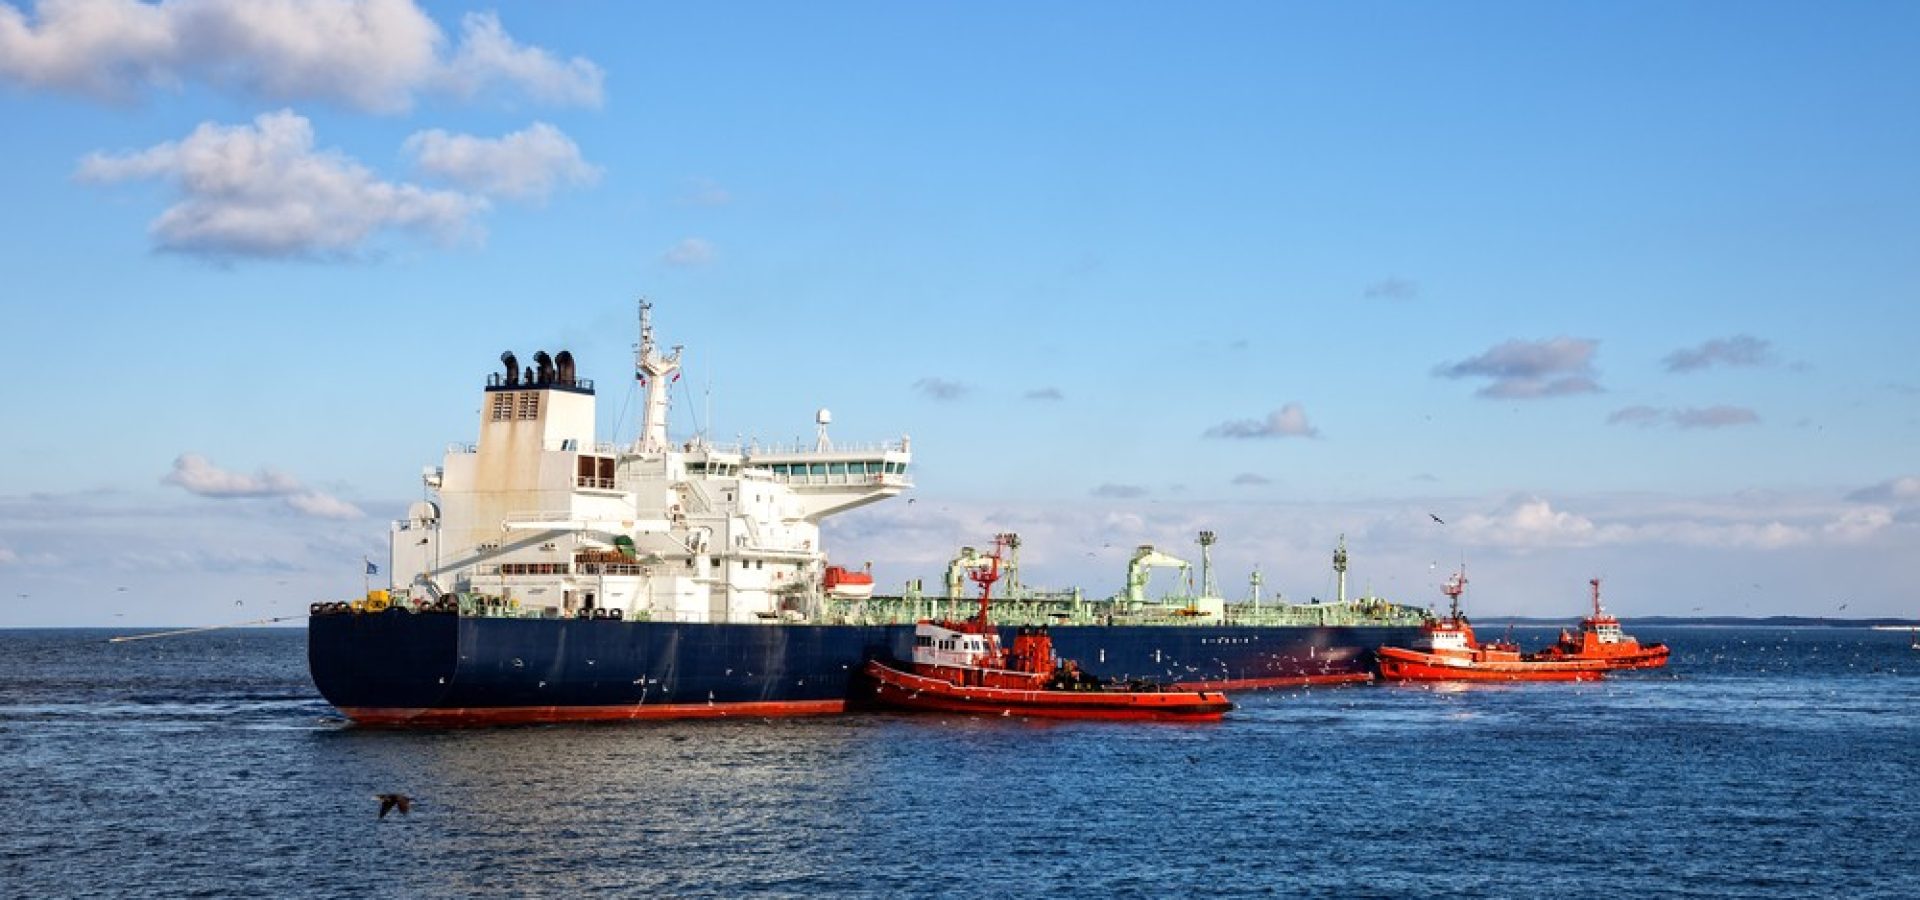 Wibest – Tanker Ship: A crude oil tanker ship in the middle of the sea.